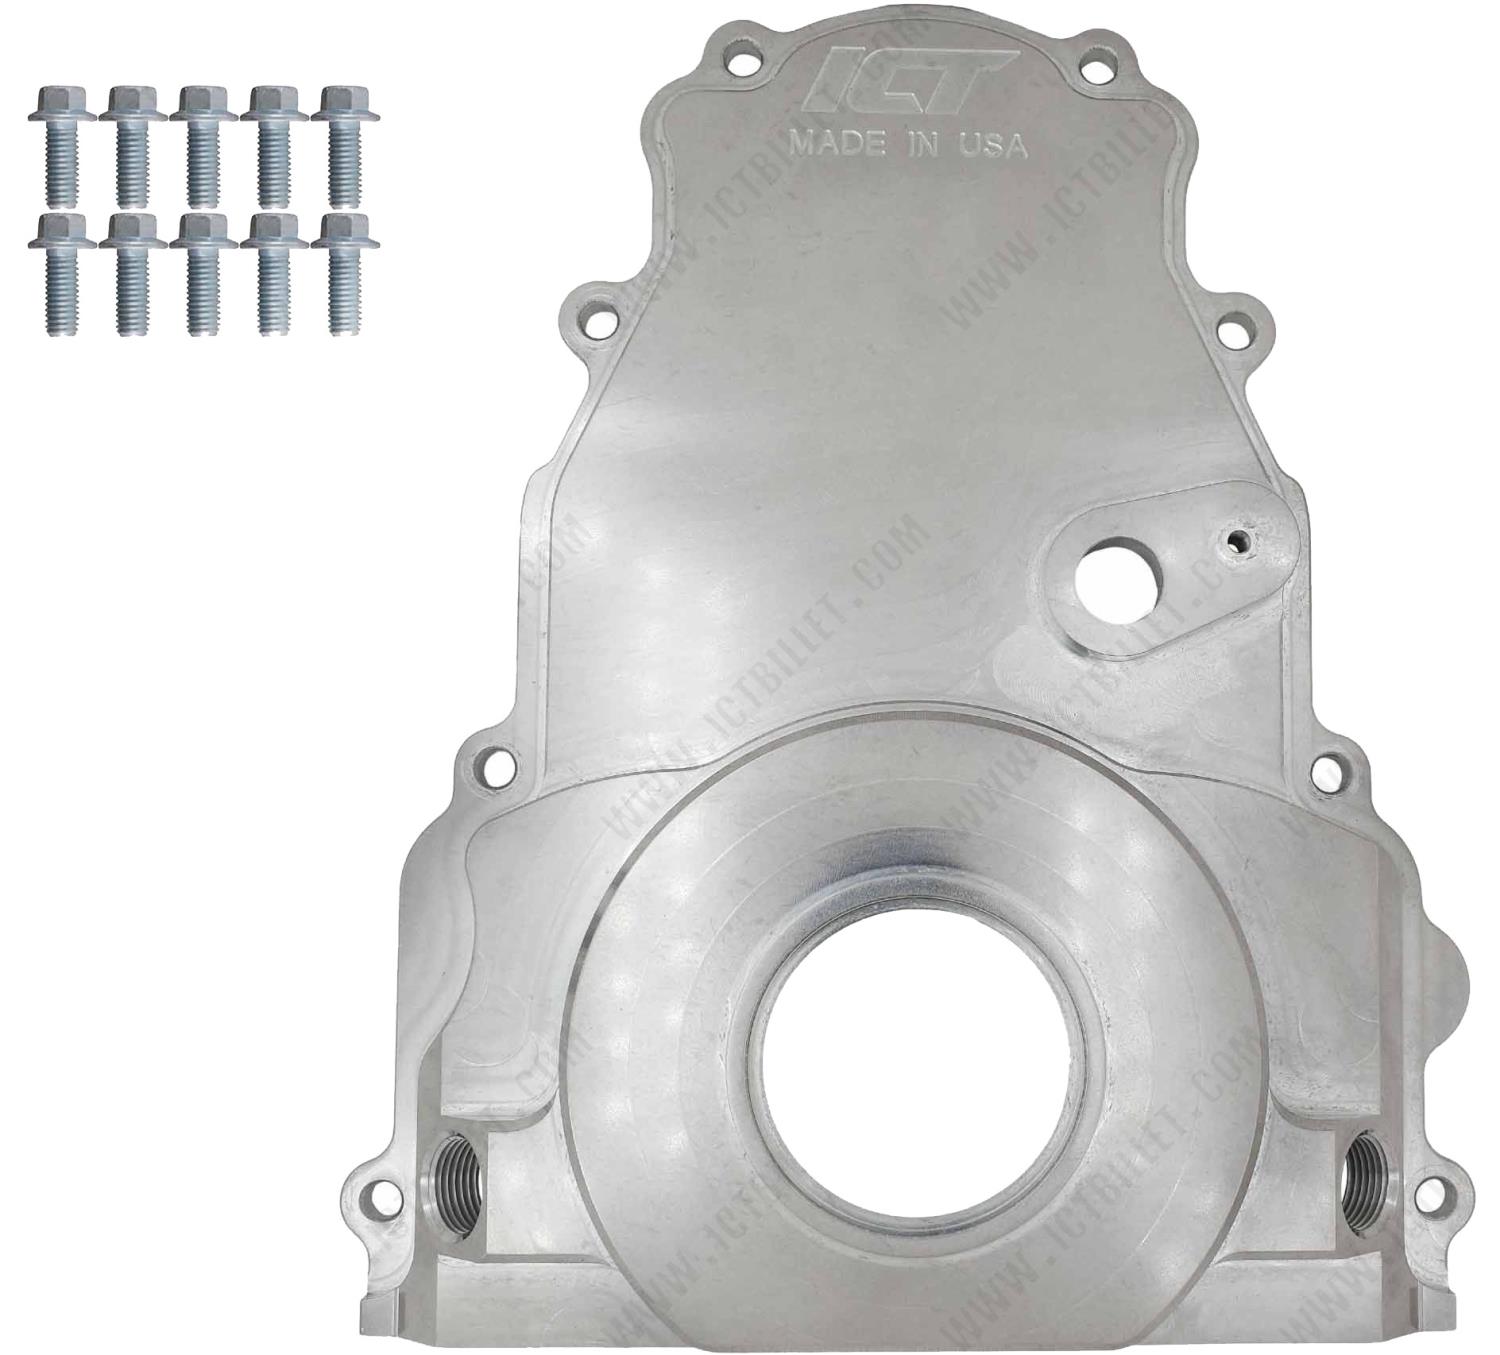 551595-LS01 Billet Timing Chain Cover w/(2) Turbo Oil